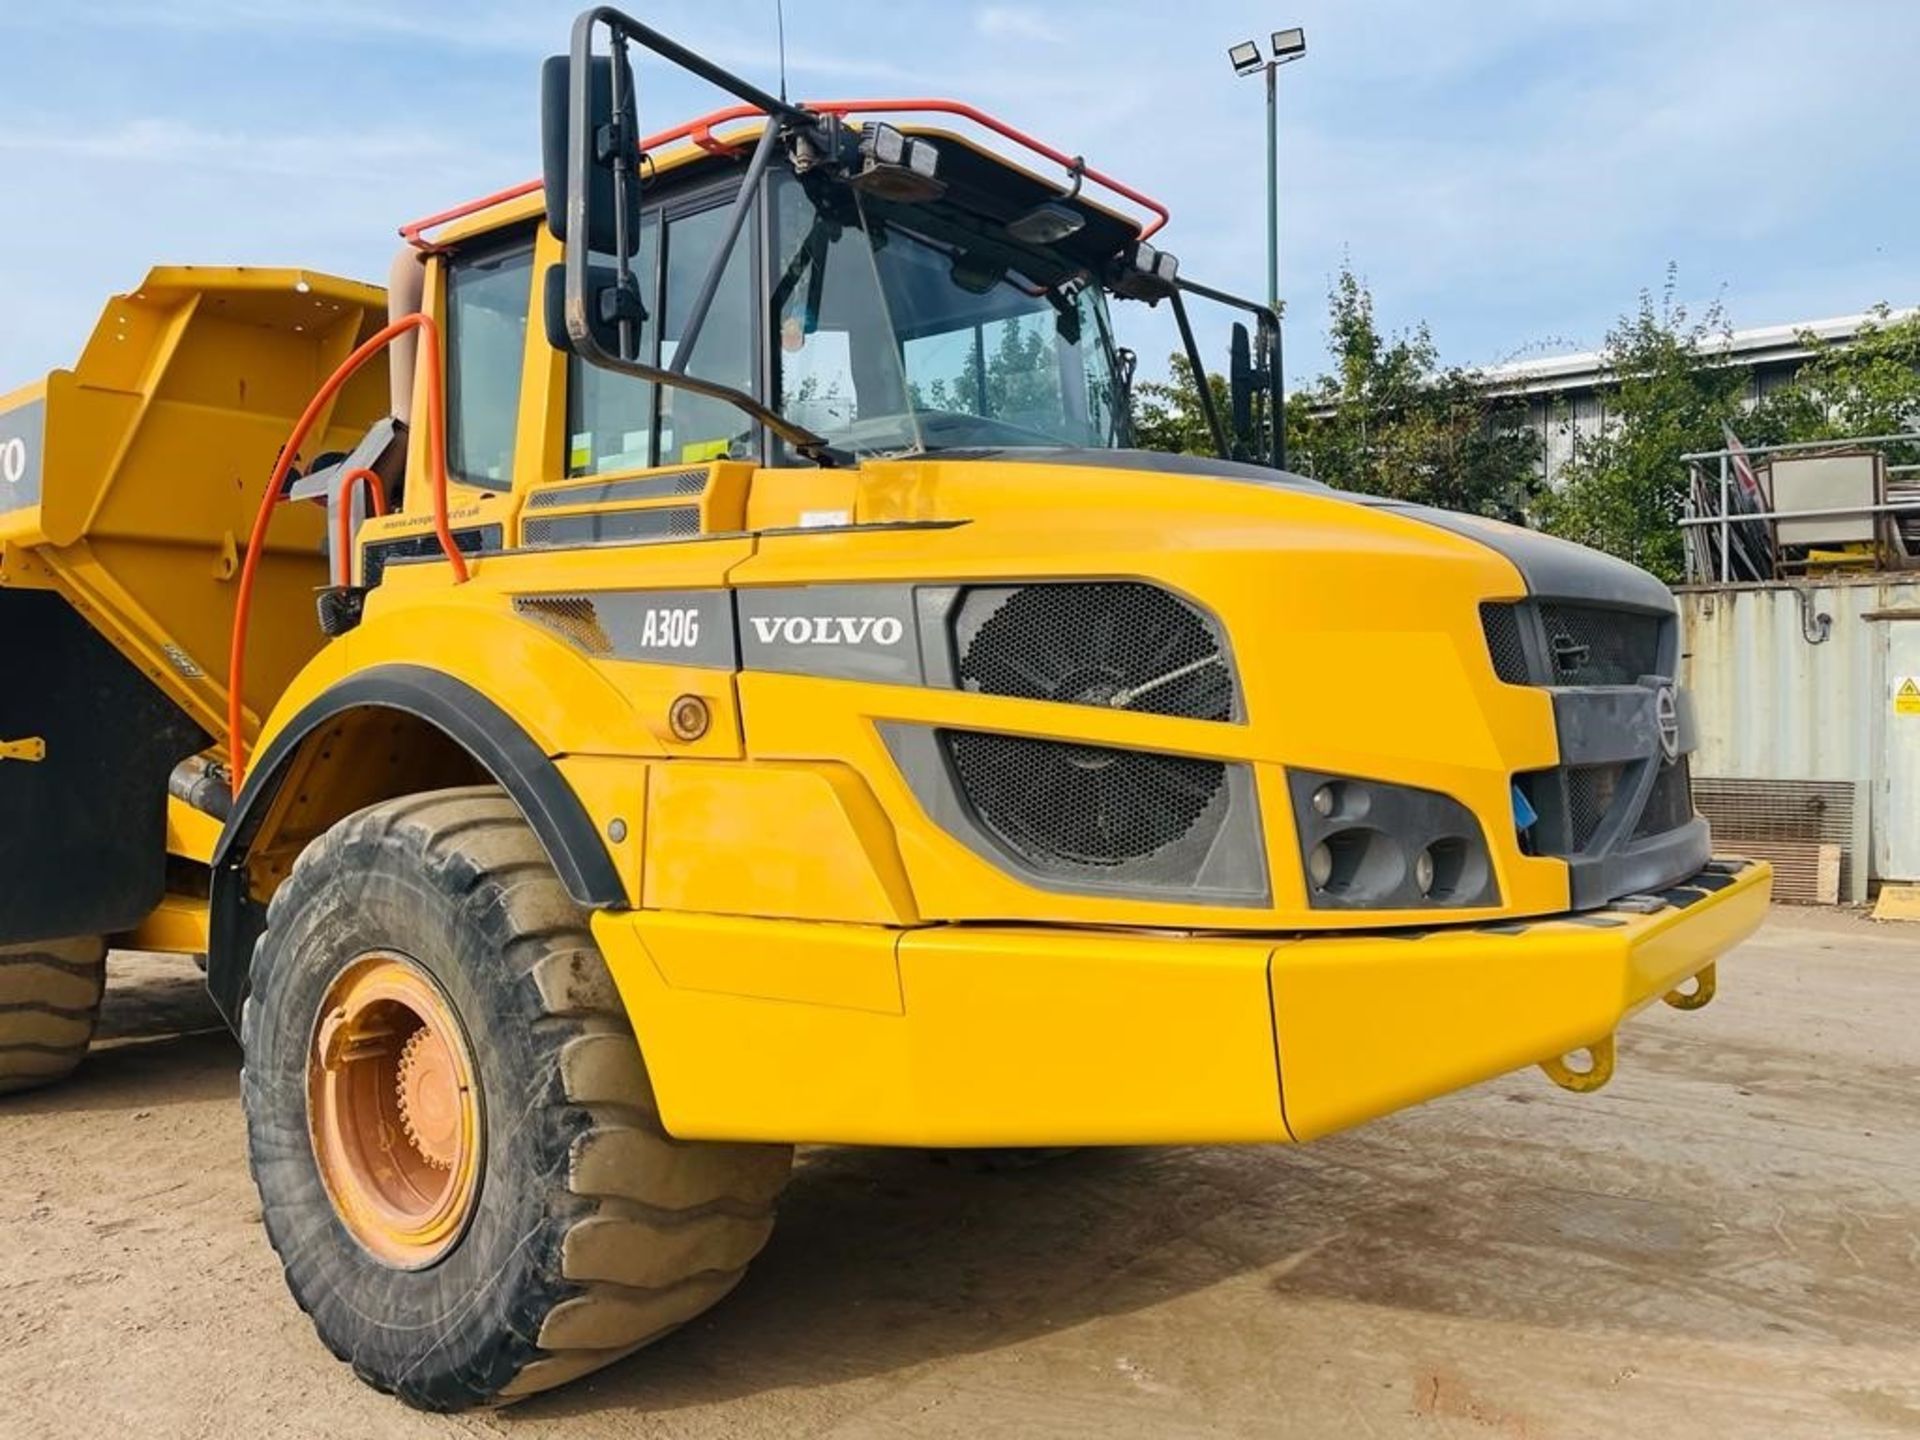 2021 - VOLVO A 30 G DUMP TRUCK - Image 8 of 20